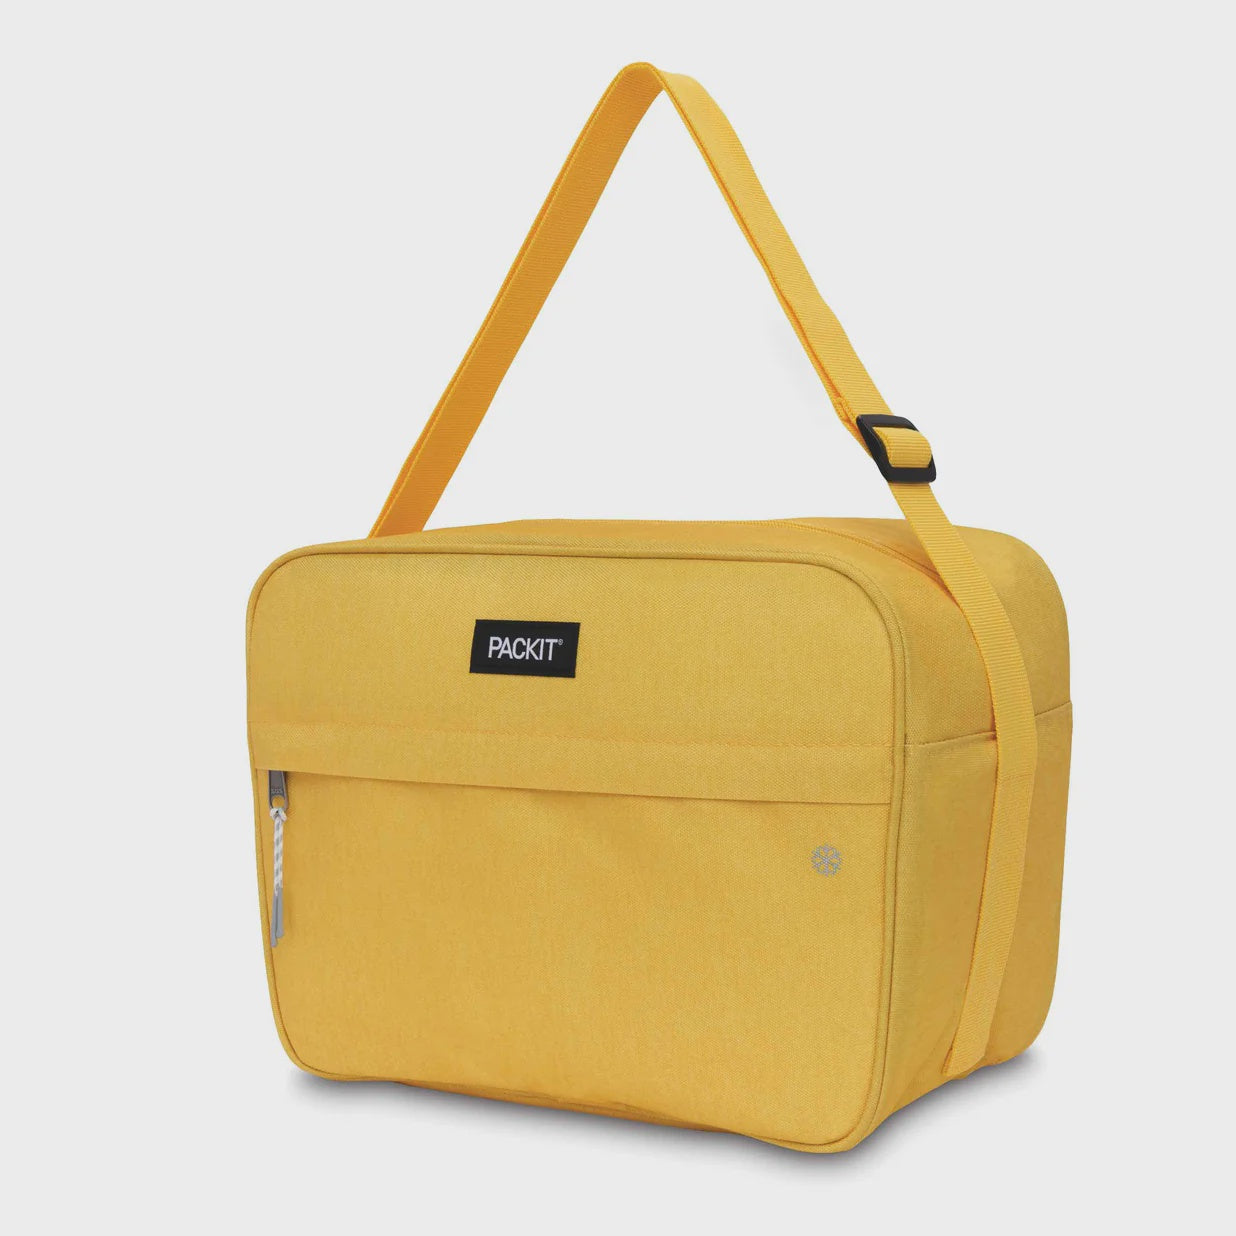 Packit Zuma 15can Cooler Bag by ERGO | Shop at The Green Collective